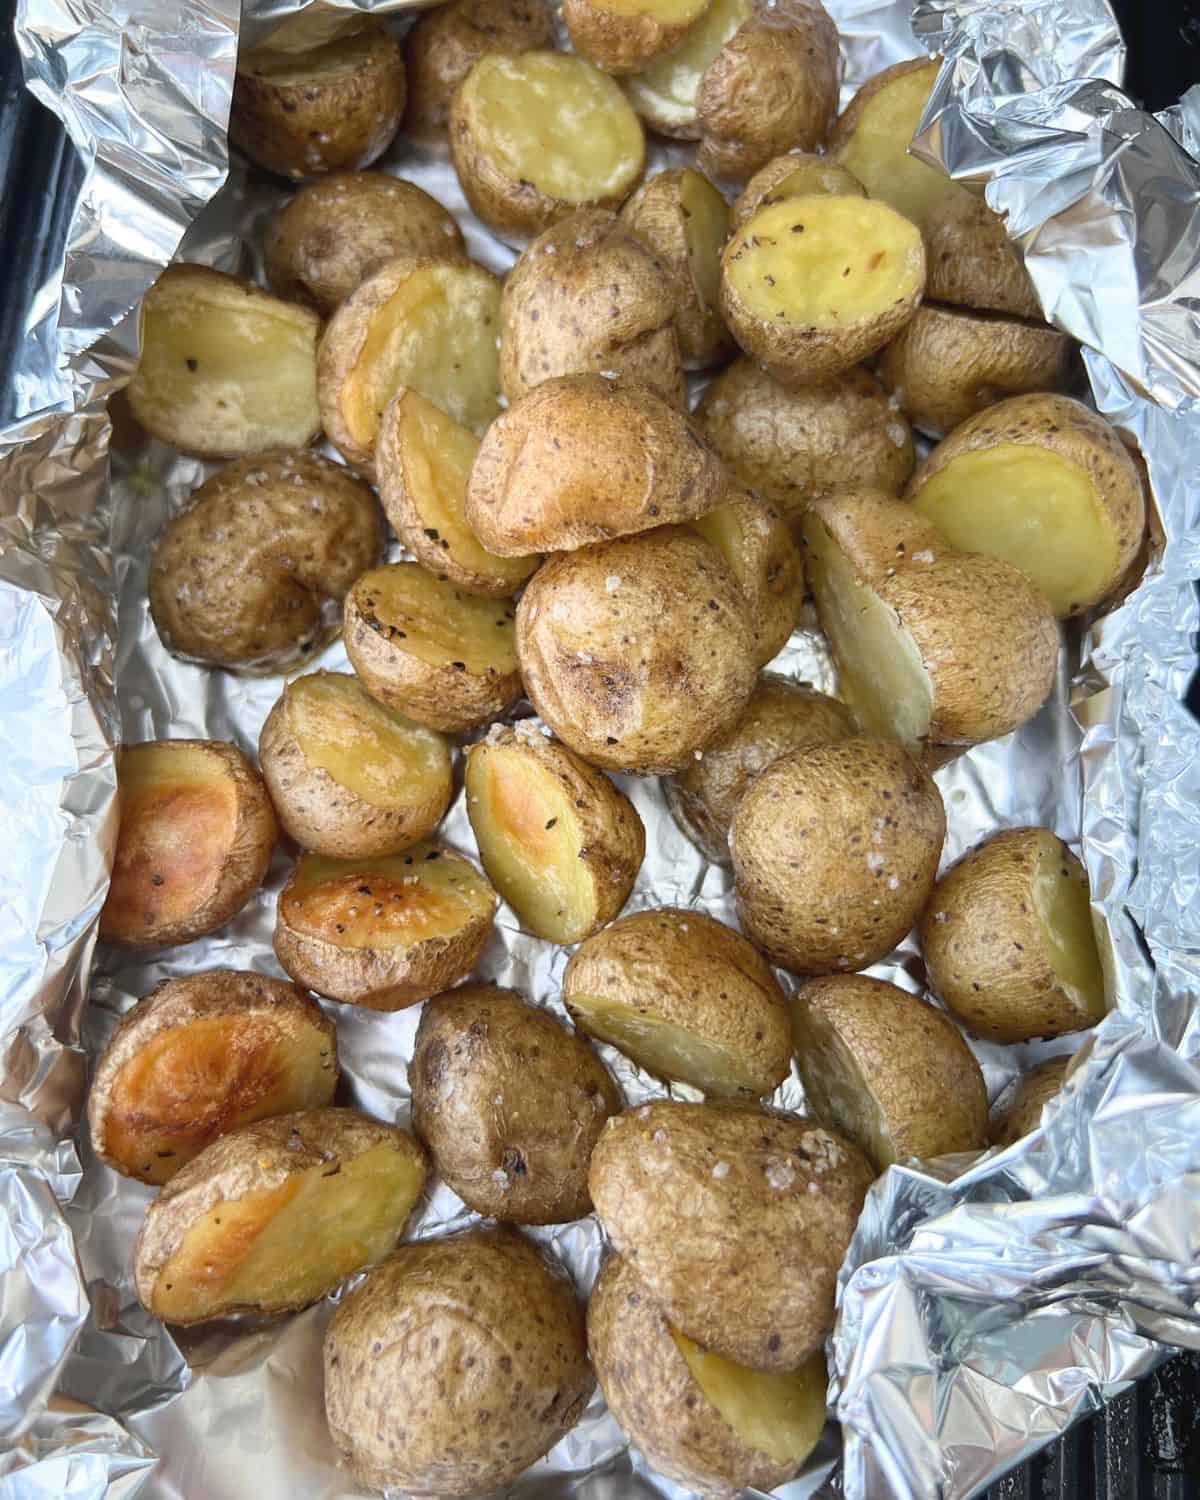 Smoked seasoned yellow potatoes with salt, olive oil, and pepper.